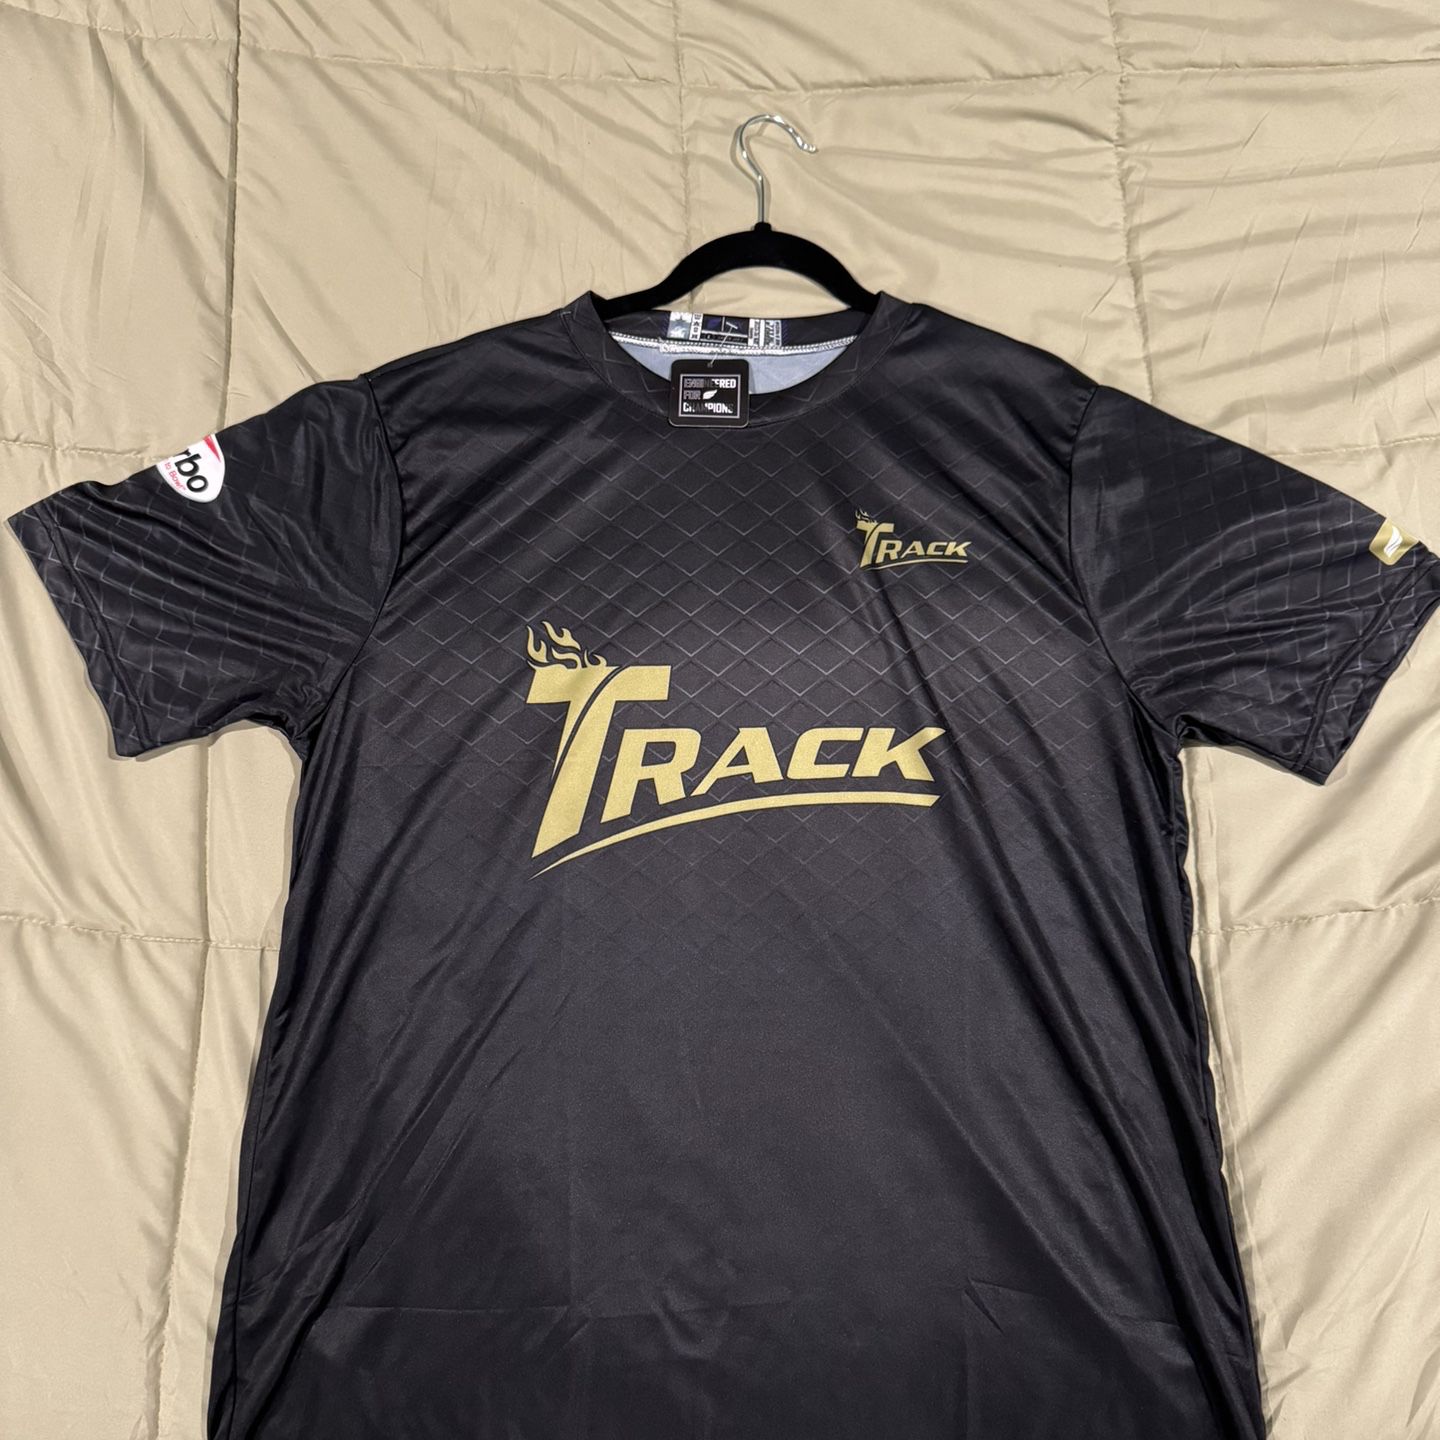 BRAND NEW EFX Track Bowling Jersey